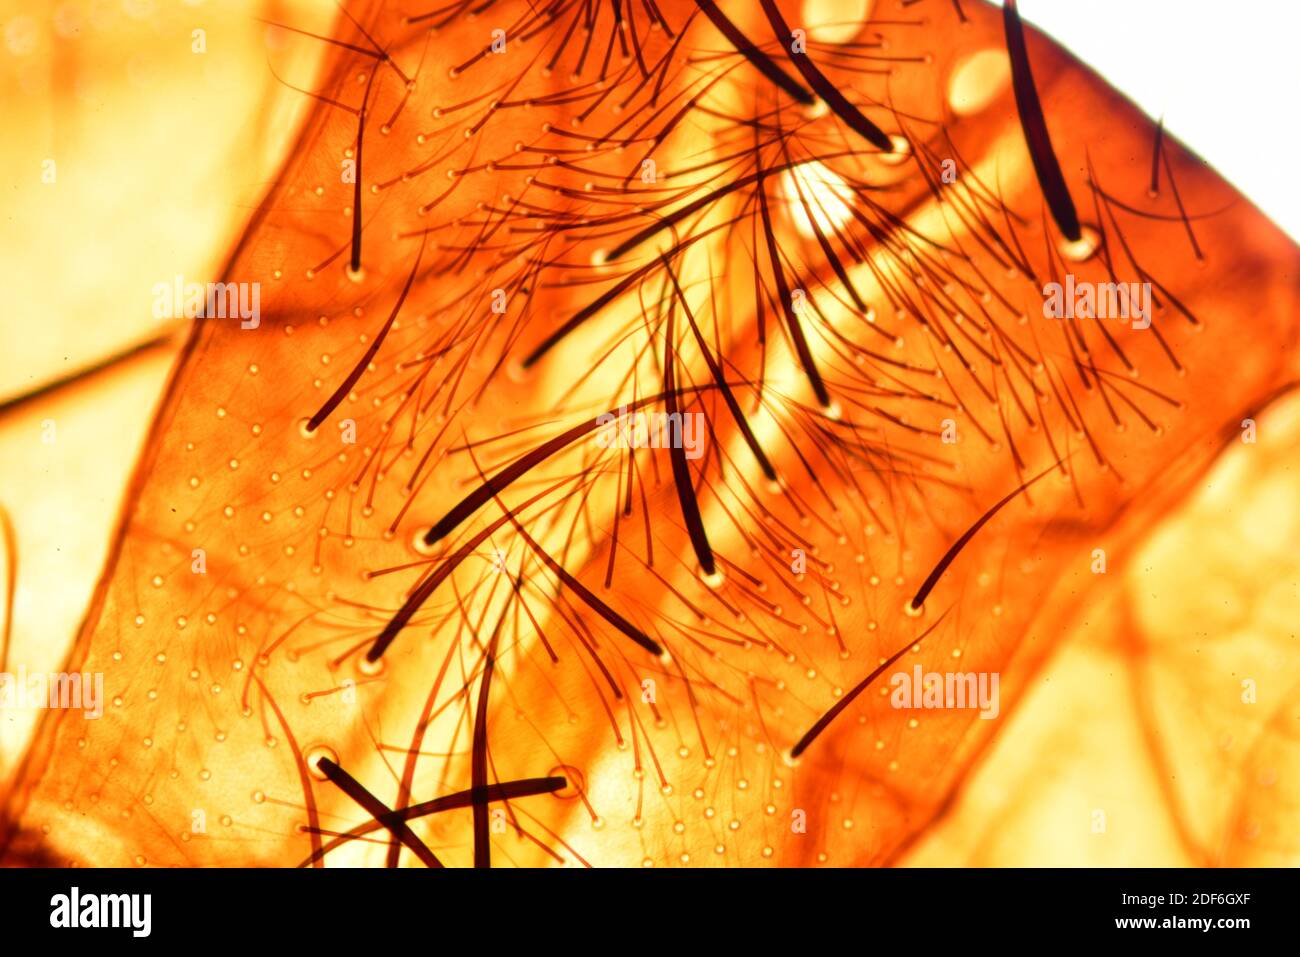 Housefly (Musca domestica) showing cuticle head with hairs. Optical microscope X100. Stock Photo